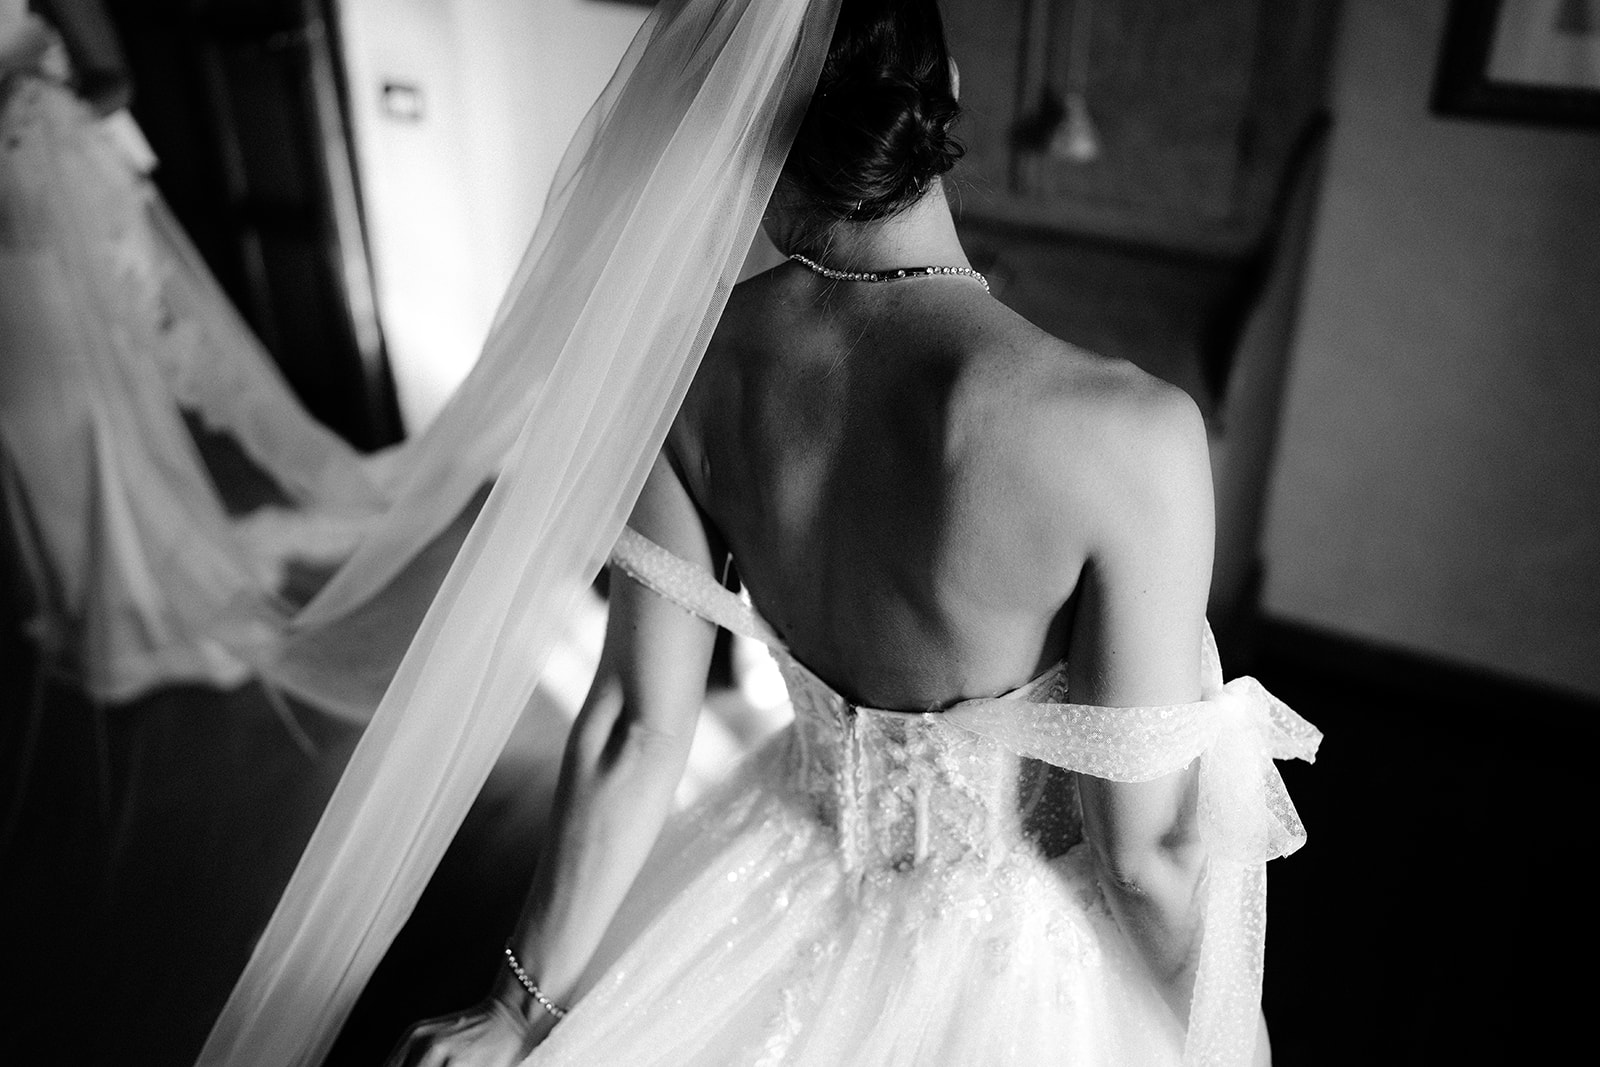 The bride's back in the Maggie Sottero dress